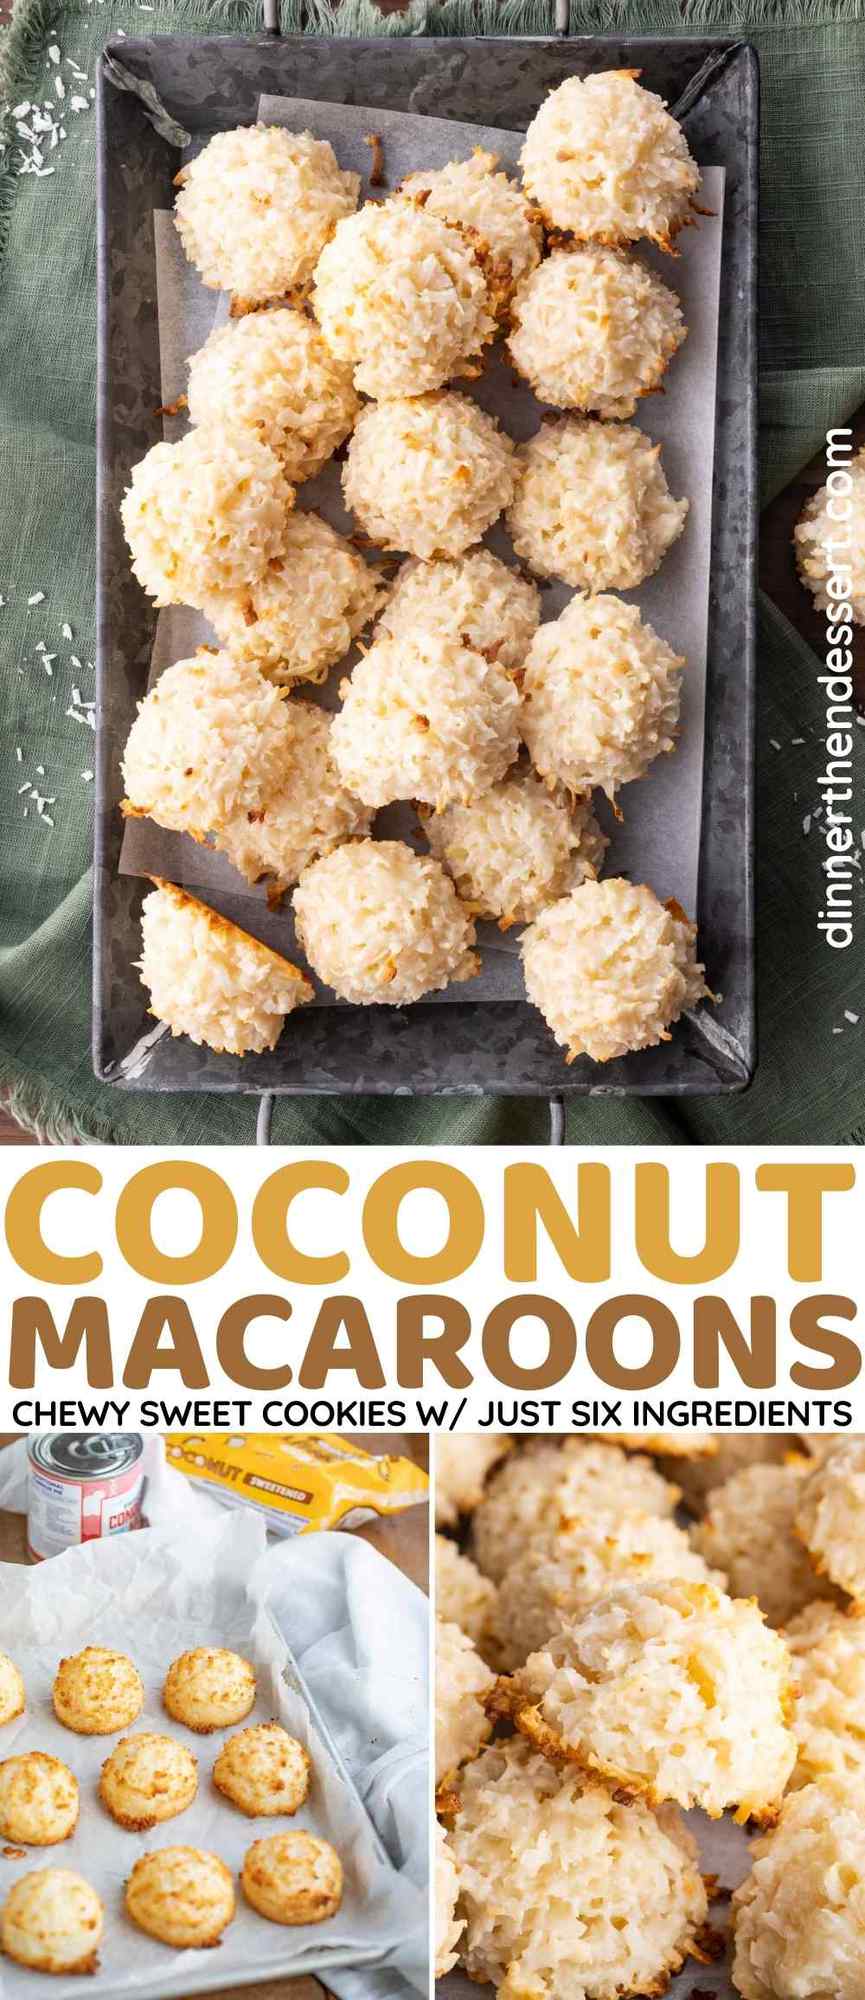 Coconut Macaroons Collage